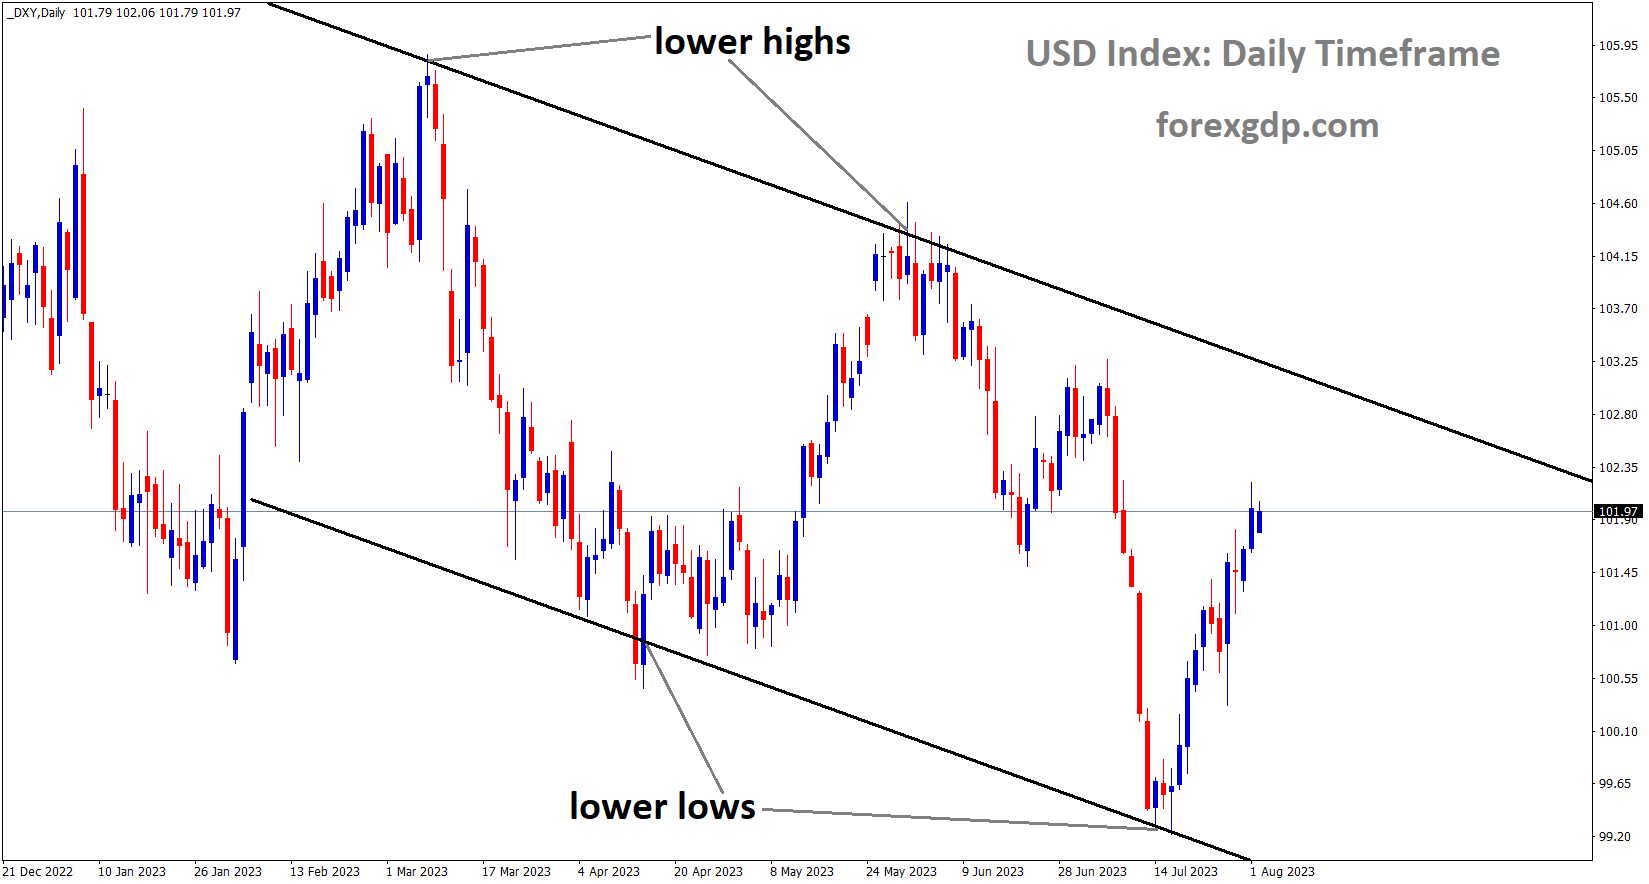 DXY US Dollar index is moving in the Descending channel and the market has rebounded from the lower low area of the channel